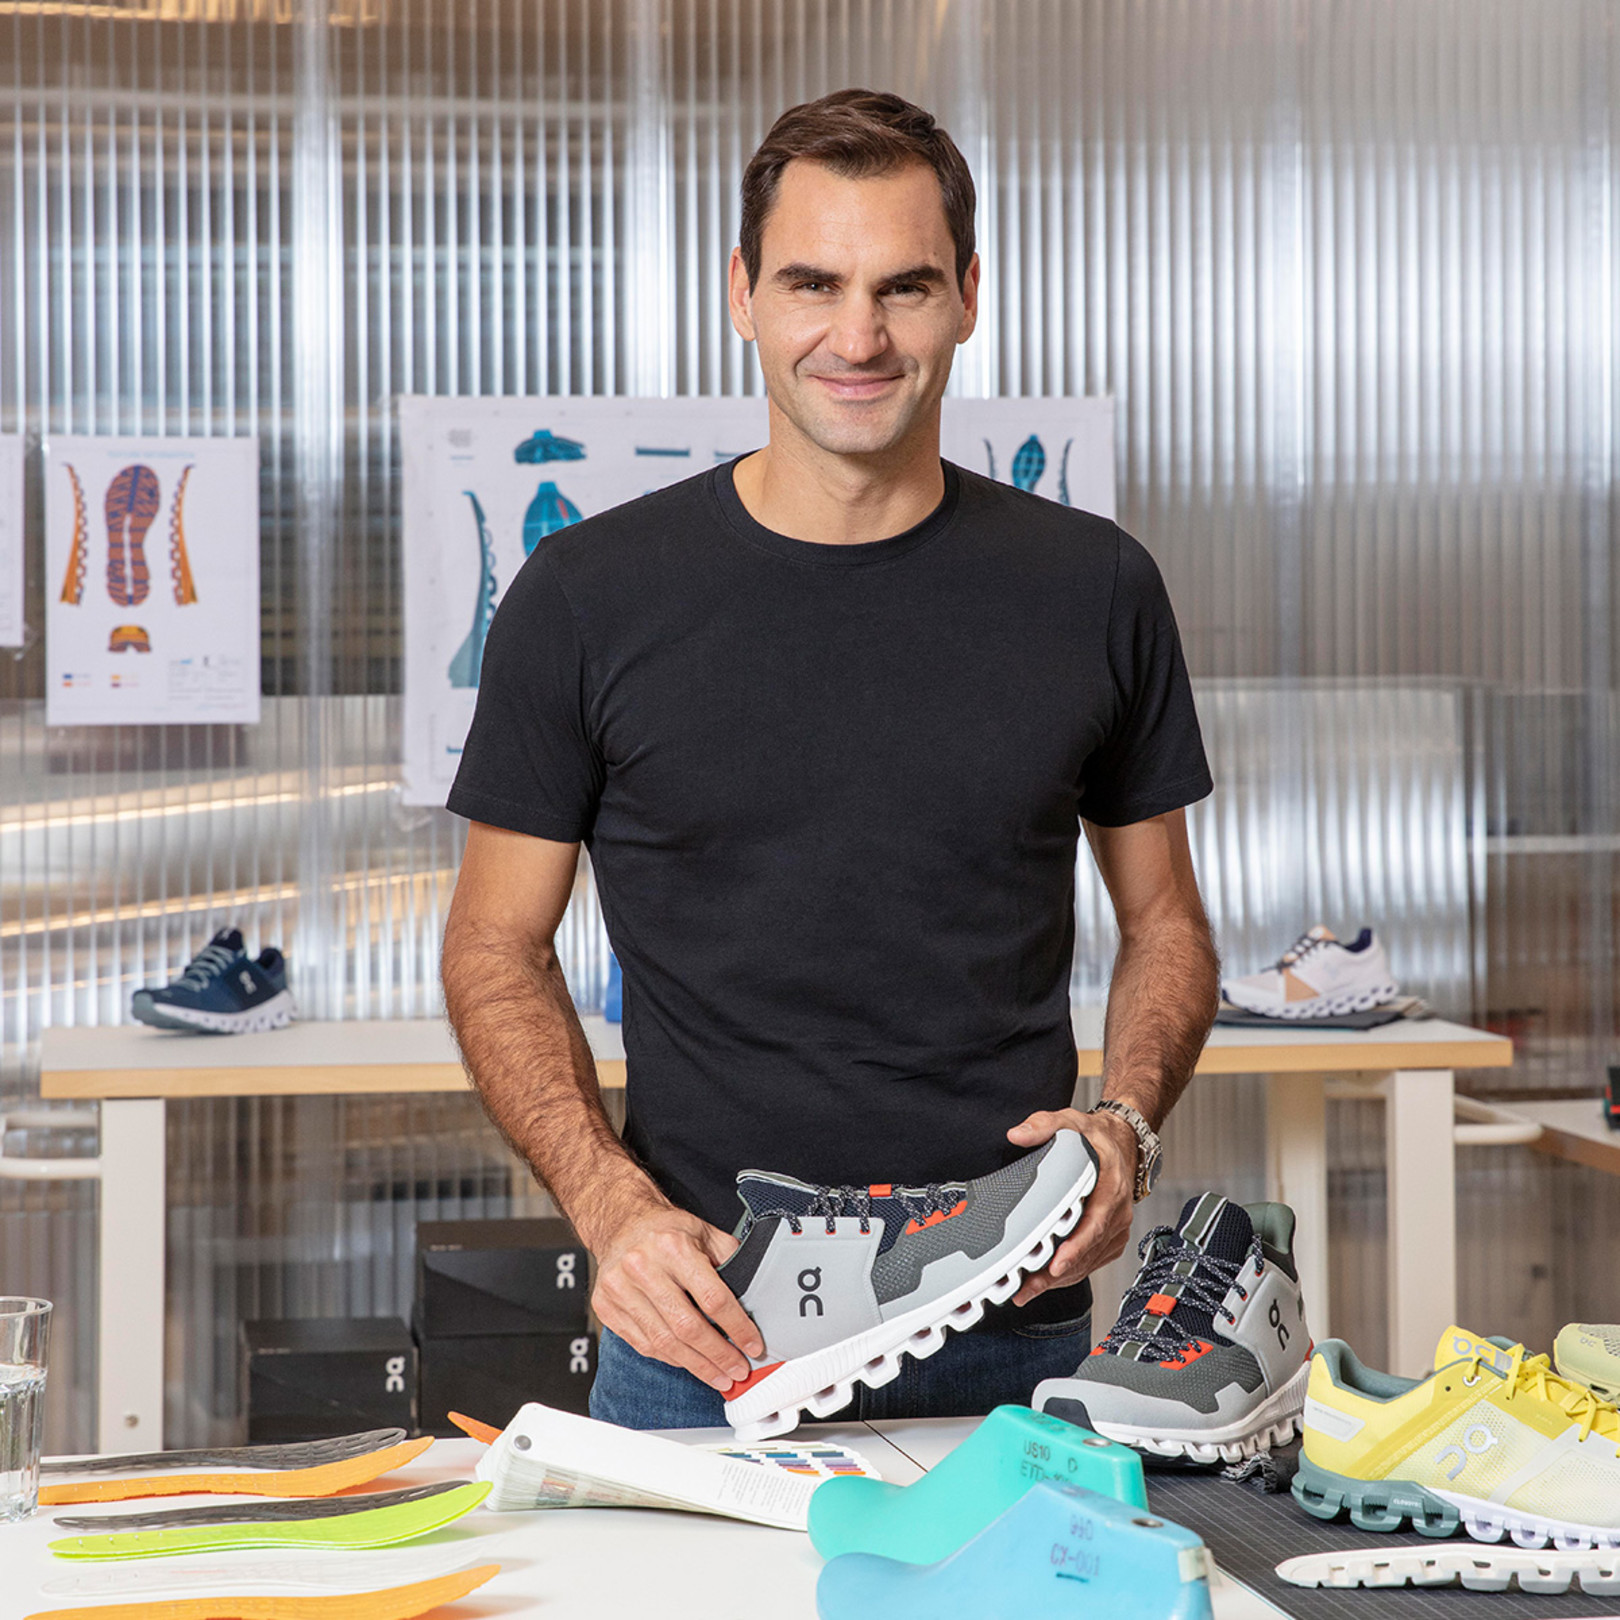 Roger Federer shoes - Nike or On shoes, what he wears in 2020?